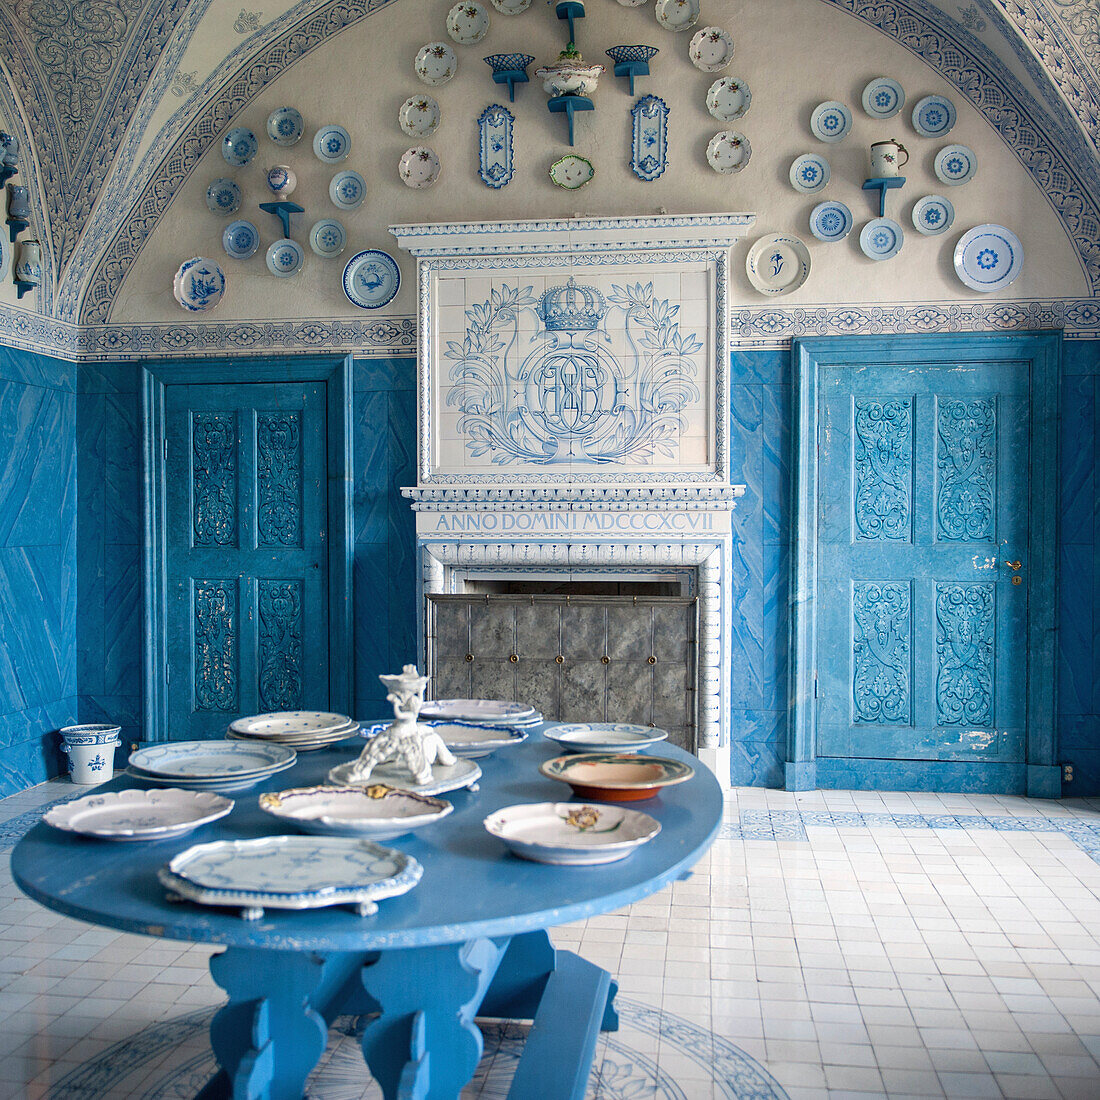 Plates On Display In A Blue And White Room In Drottningholm Palace; Stockholm Sweden